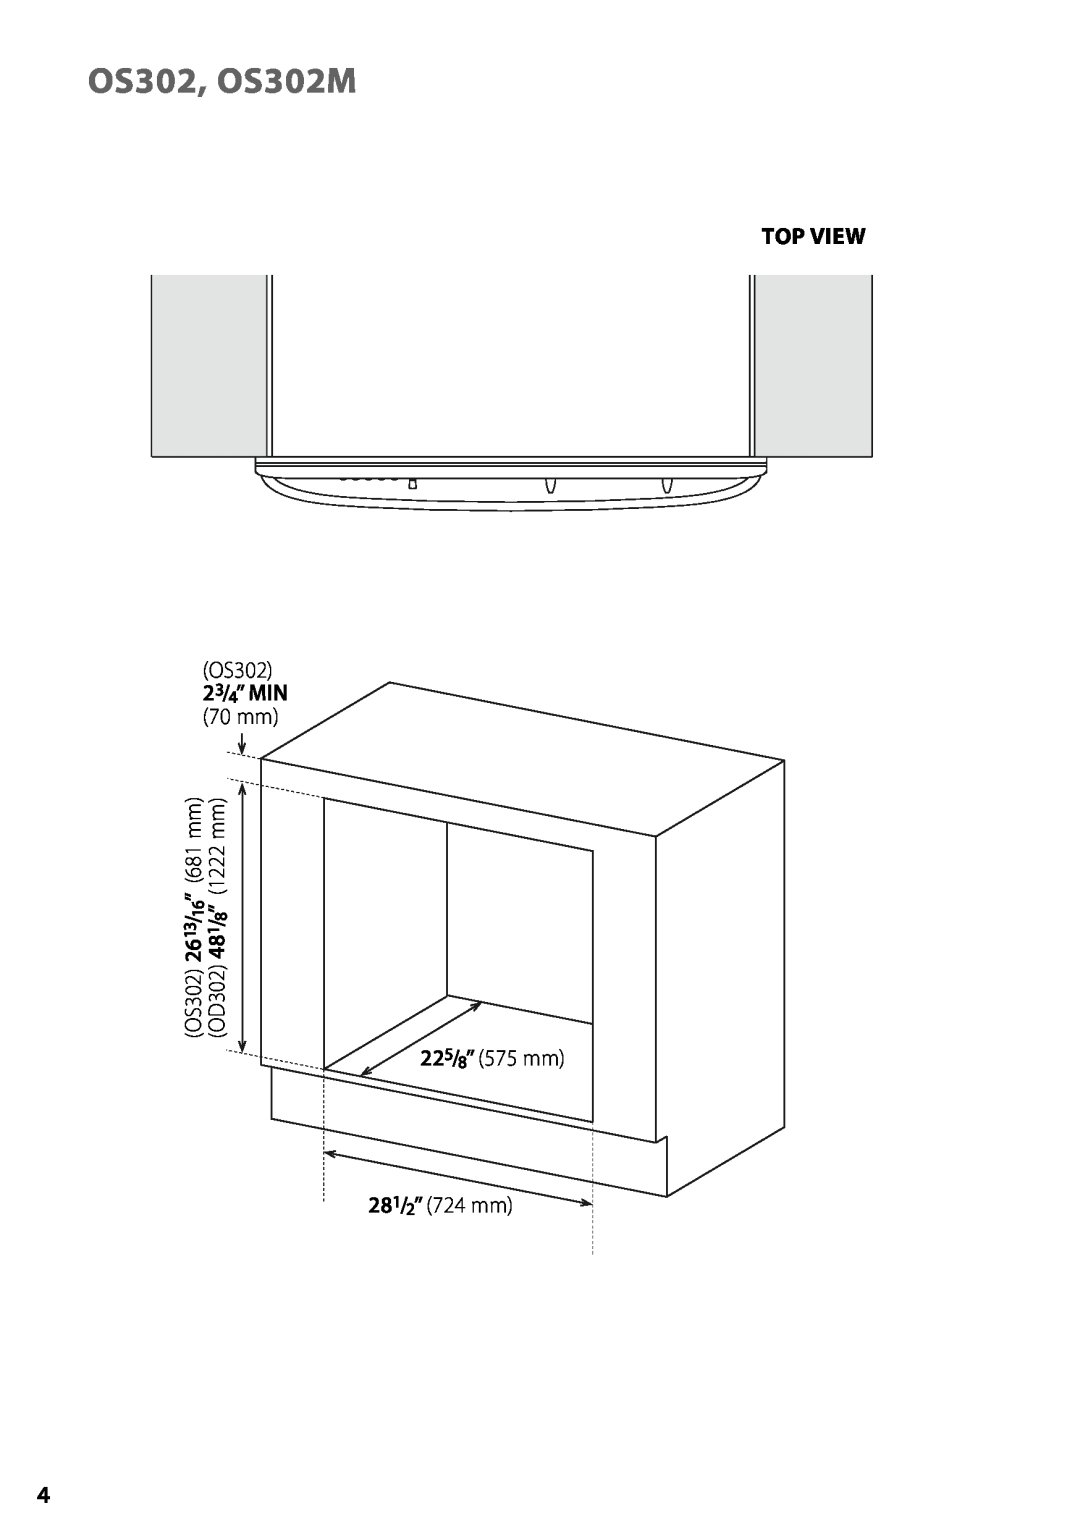 Fisher & Paykel OD302M installation instructions Top View, 23/4” MIN, OS302, OS302M, ” 681 mm, 1222 mm 